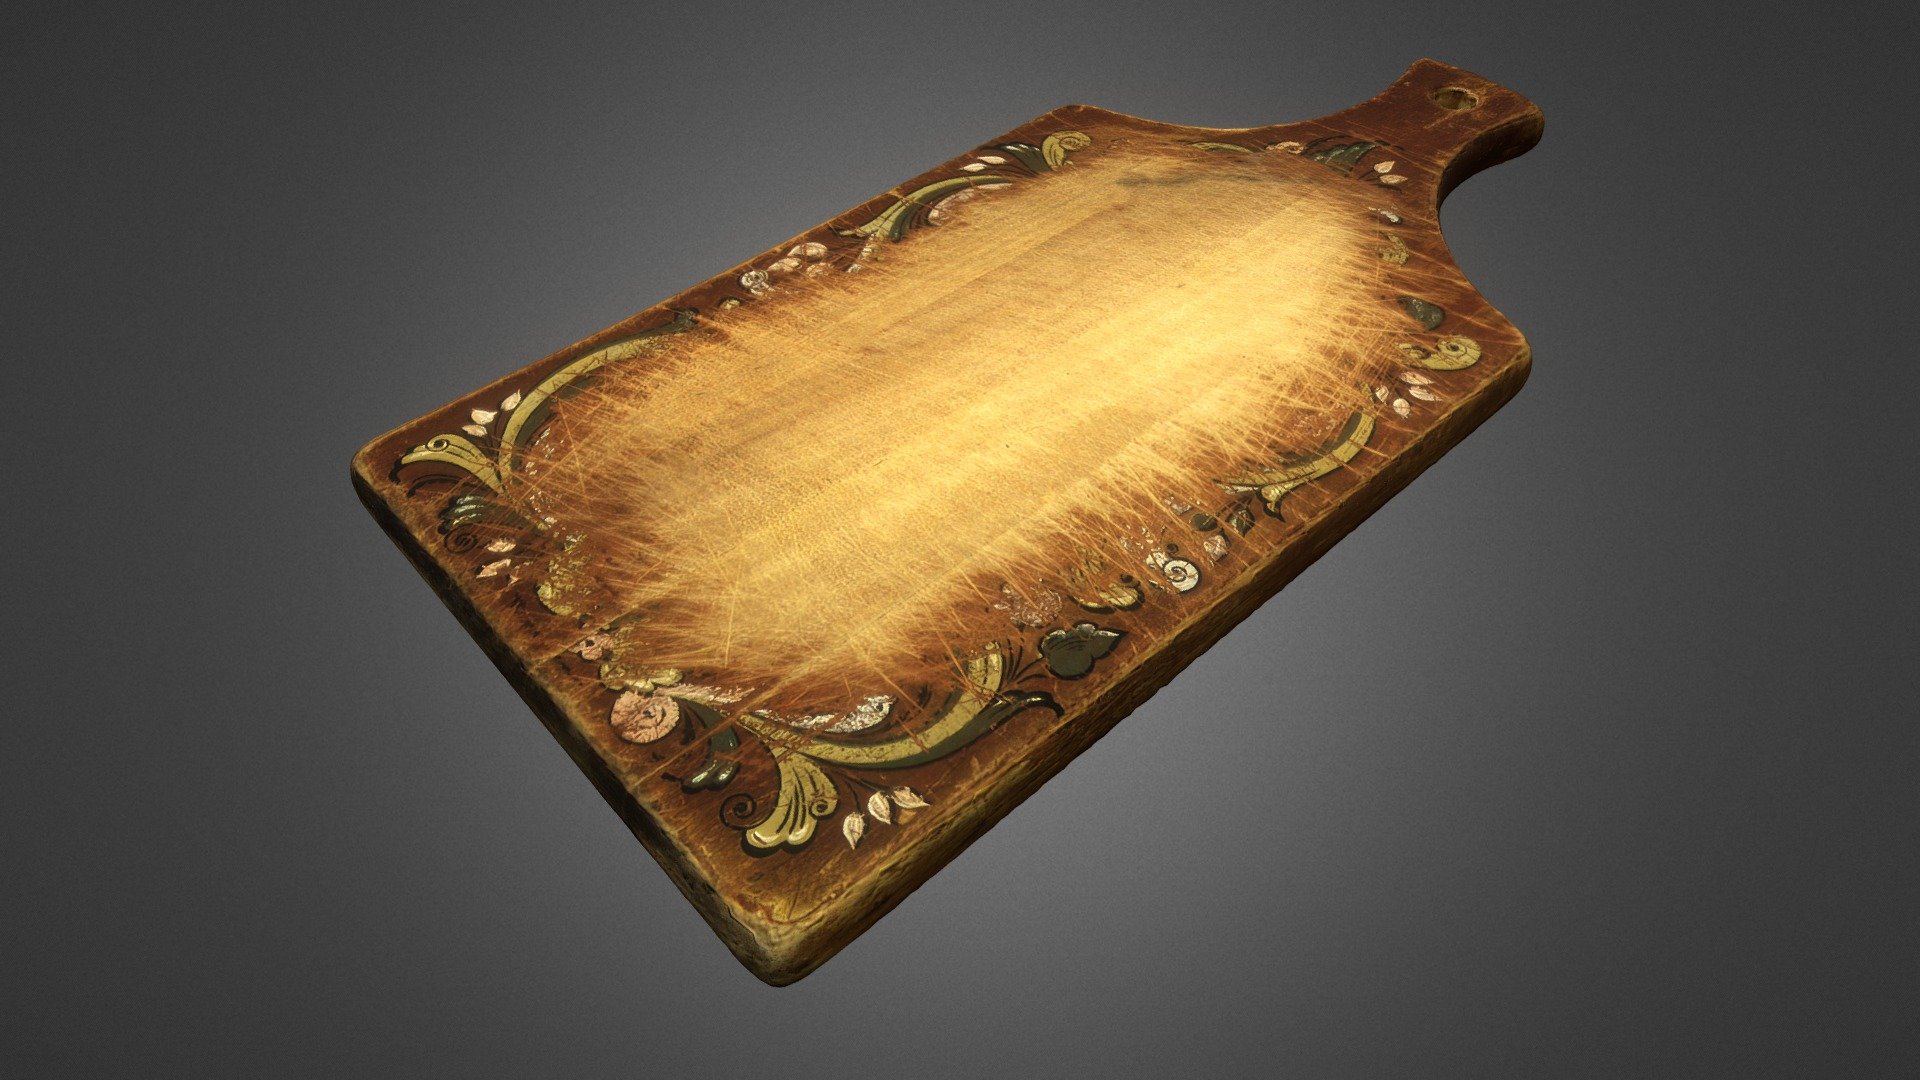 3D Scanned wooden cutting board that has a a lot of use. Excellent cutting board for an old kitchen scene.

Comes with

3D


.fbx
.obj
.max (2020)

2D


DIFFUSE
NRM
GLOSSINESS

If you have any issues please reach out and I wil get back to you ASAP

- REO CS - Wooden cutting board with heavy use - Buy Royalty Free 3D model by Reo Creative Scanning (@ReoCreativeScanning) 3d model